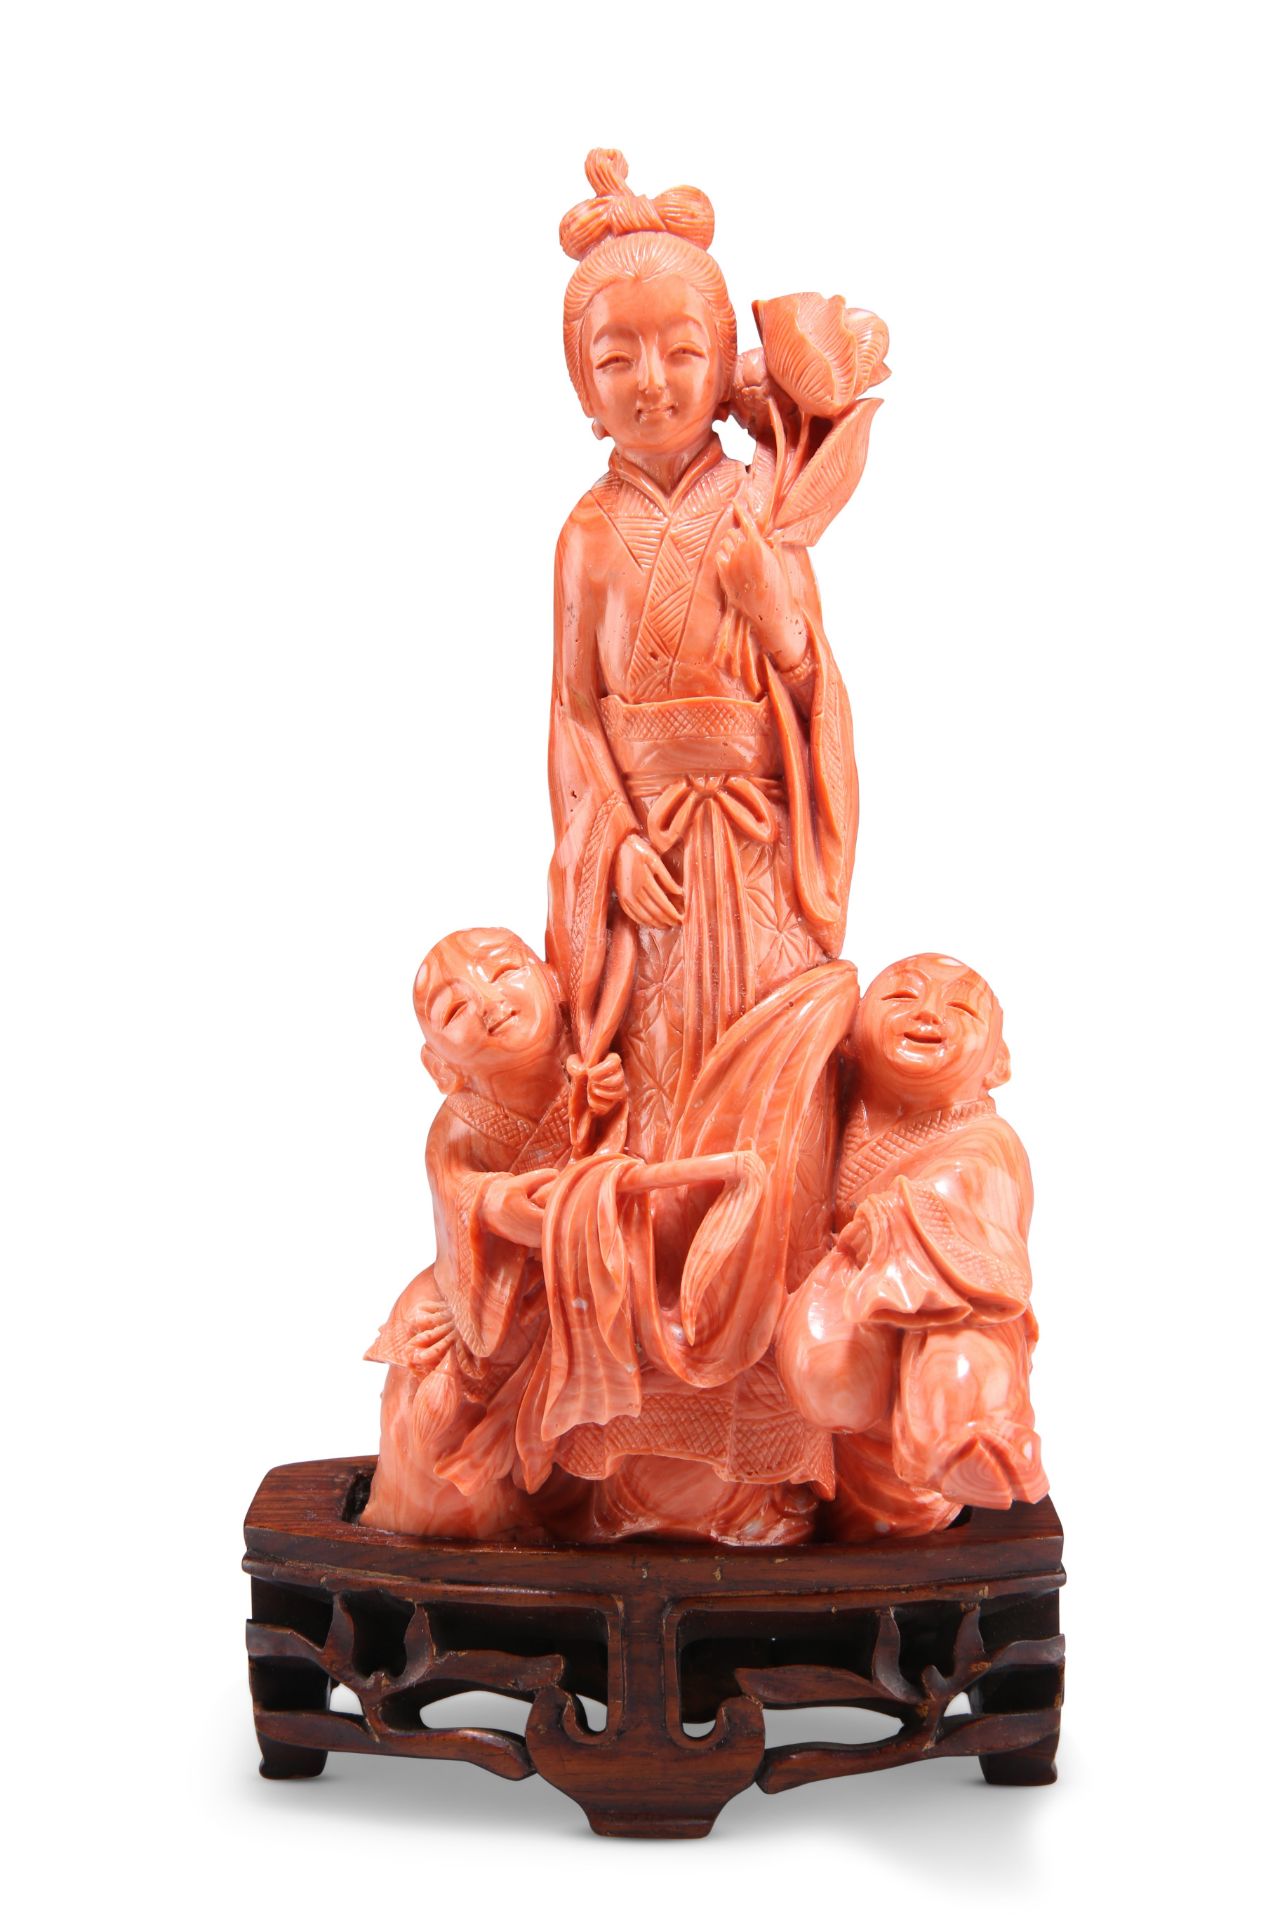 A FINE 19TH CENTURY CHINESE CARVED CORAL FIGURE GROUP